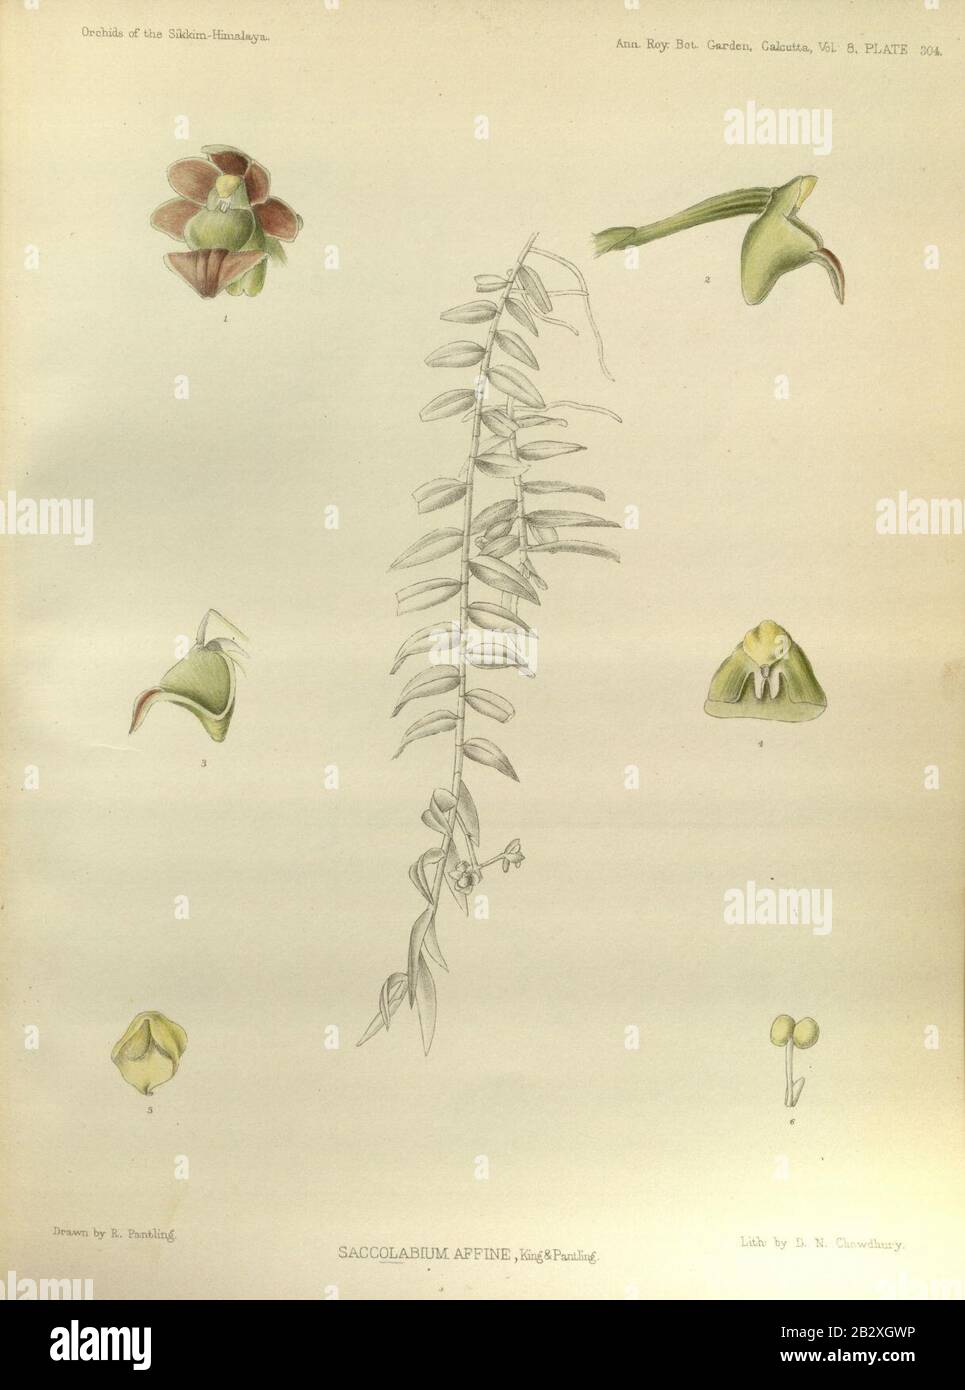 Gastrochilus affinis (as Saccolabium affinum) - The Orchids of the Sikkim-Himalaya pl 304 (1889). Stock Photo